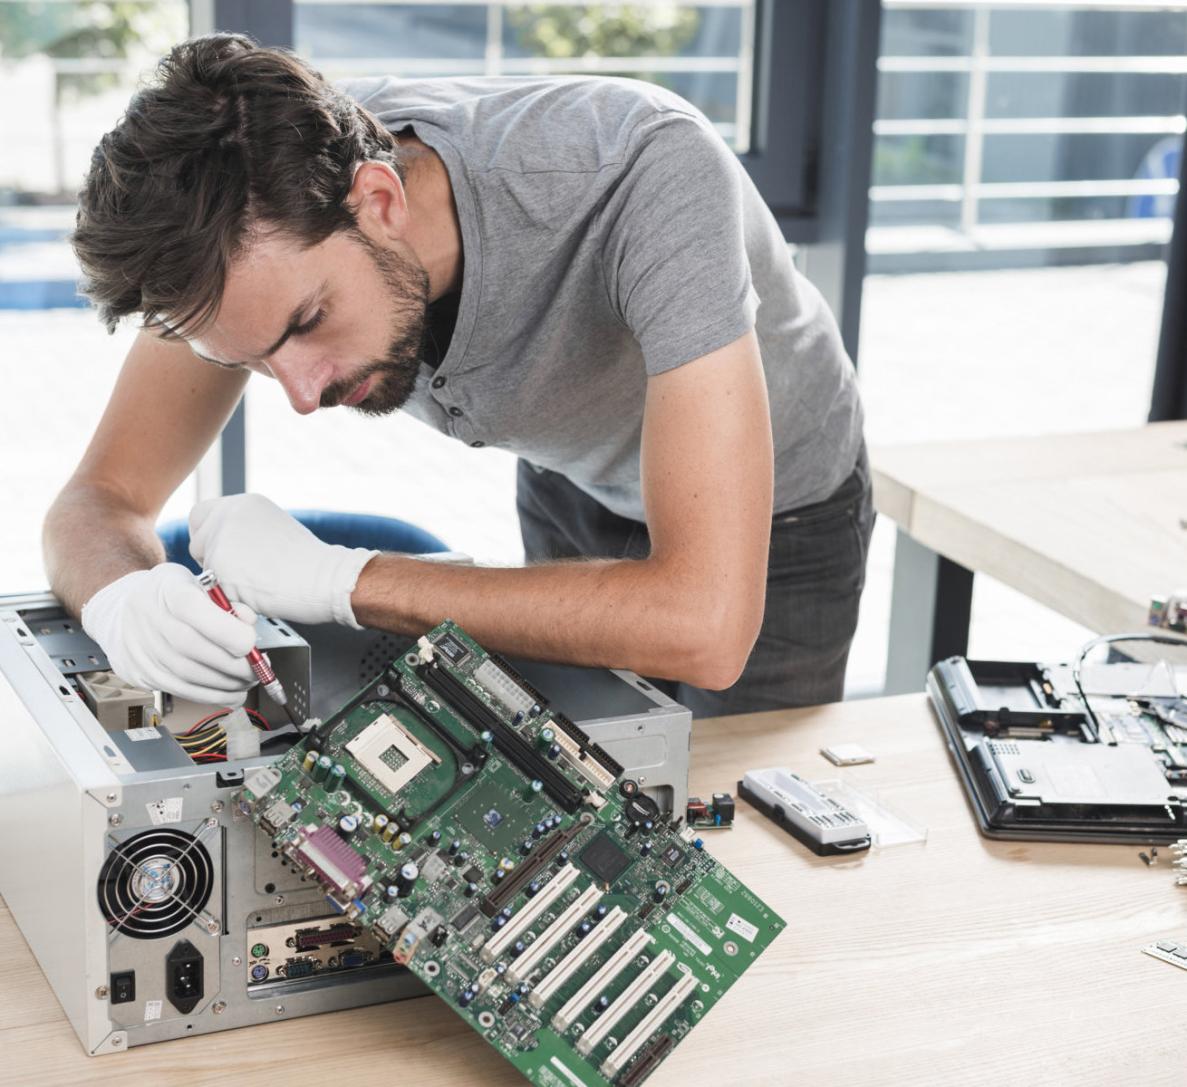 What Are the Potential Earnings for Computer Repair Technicians?